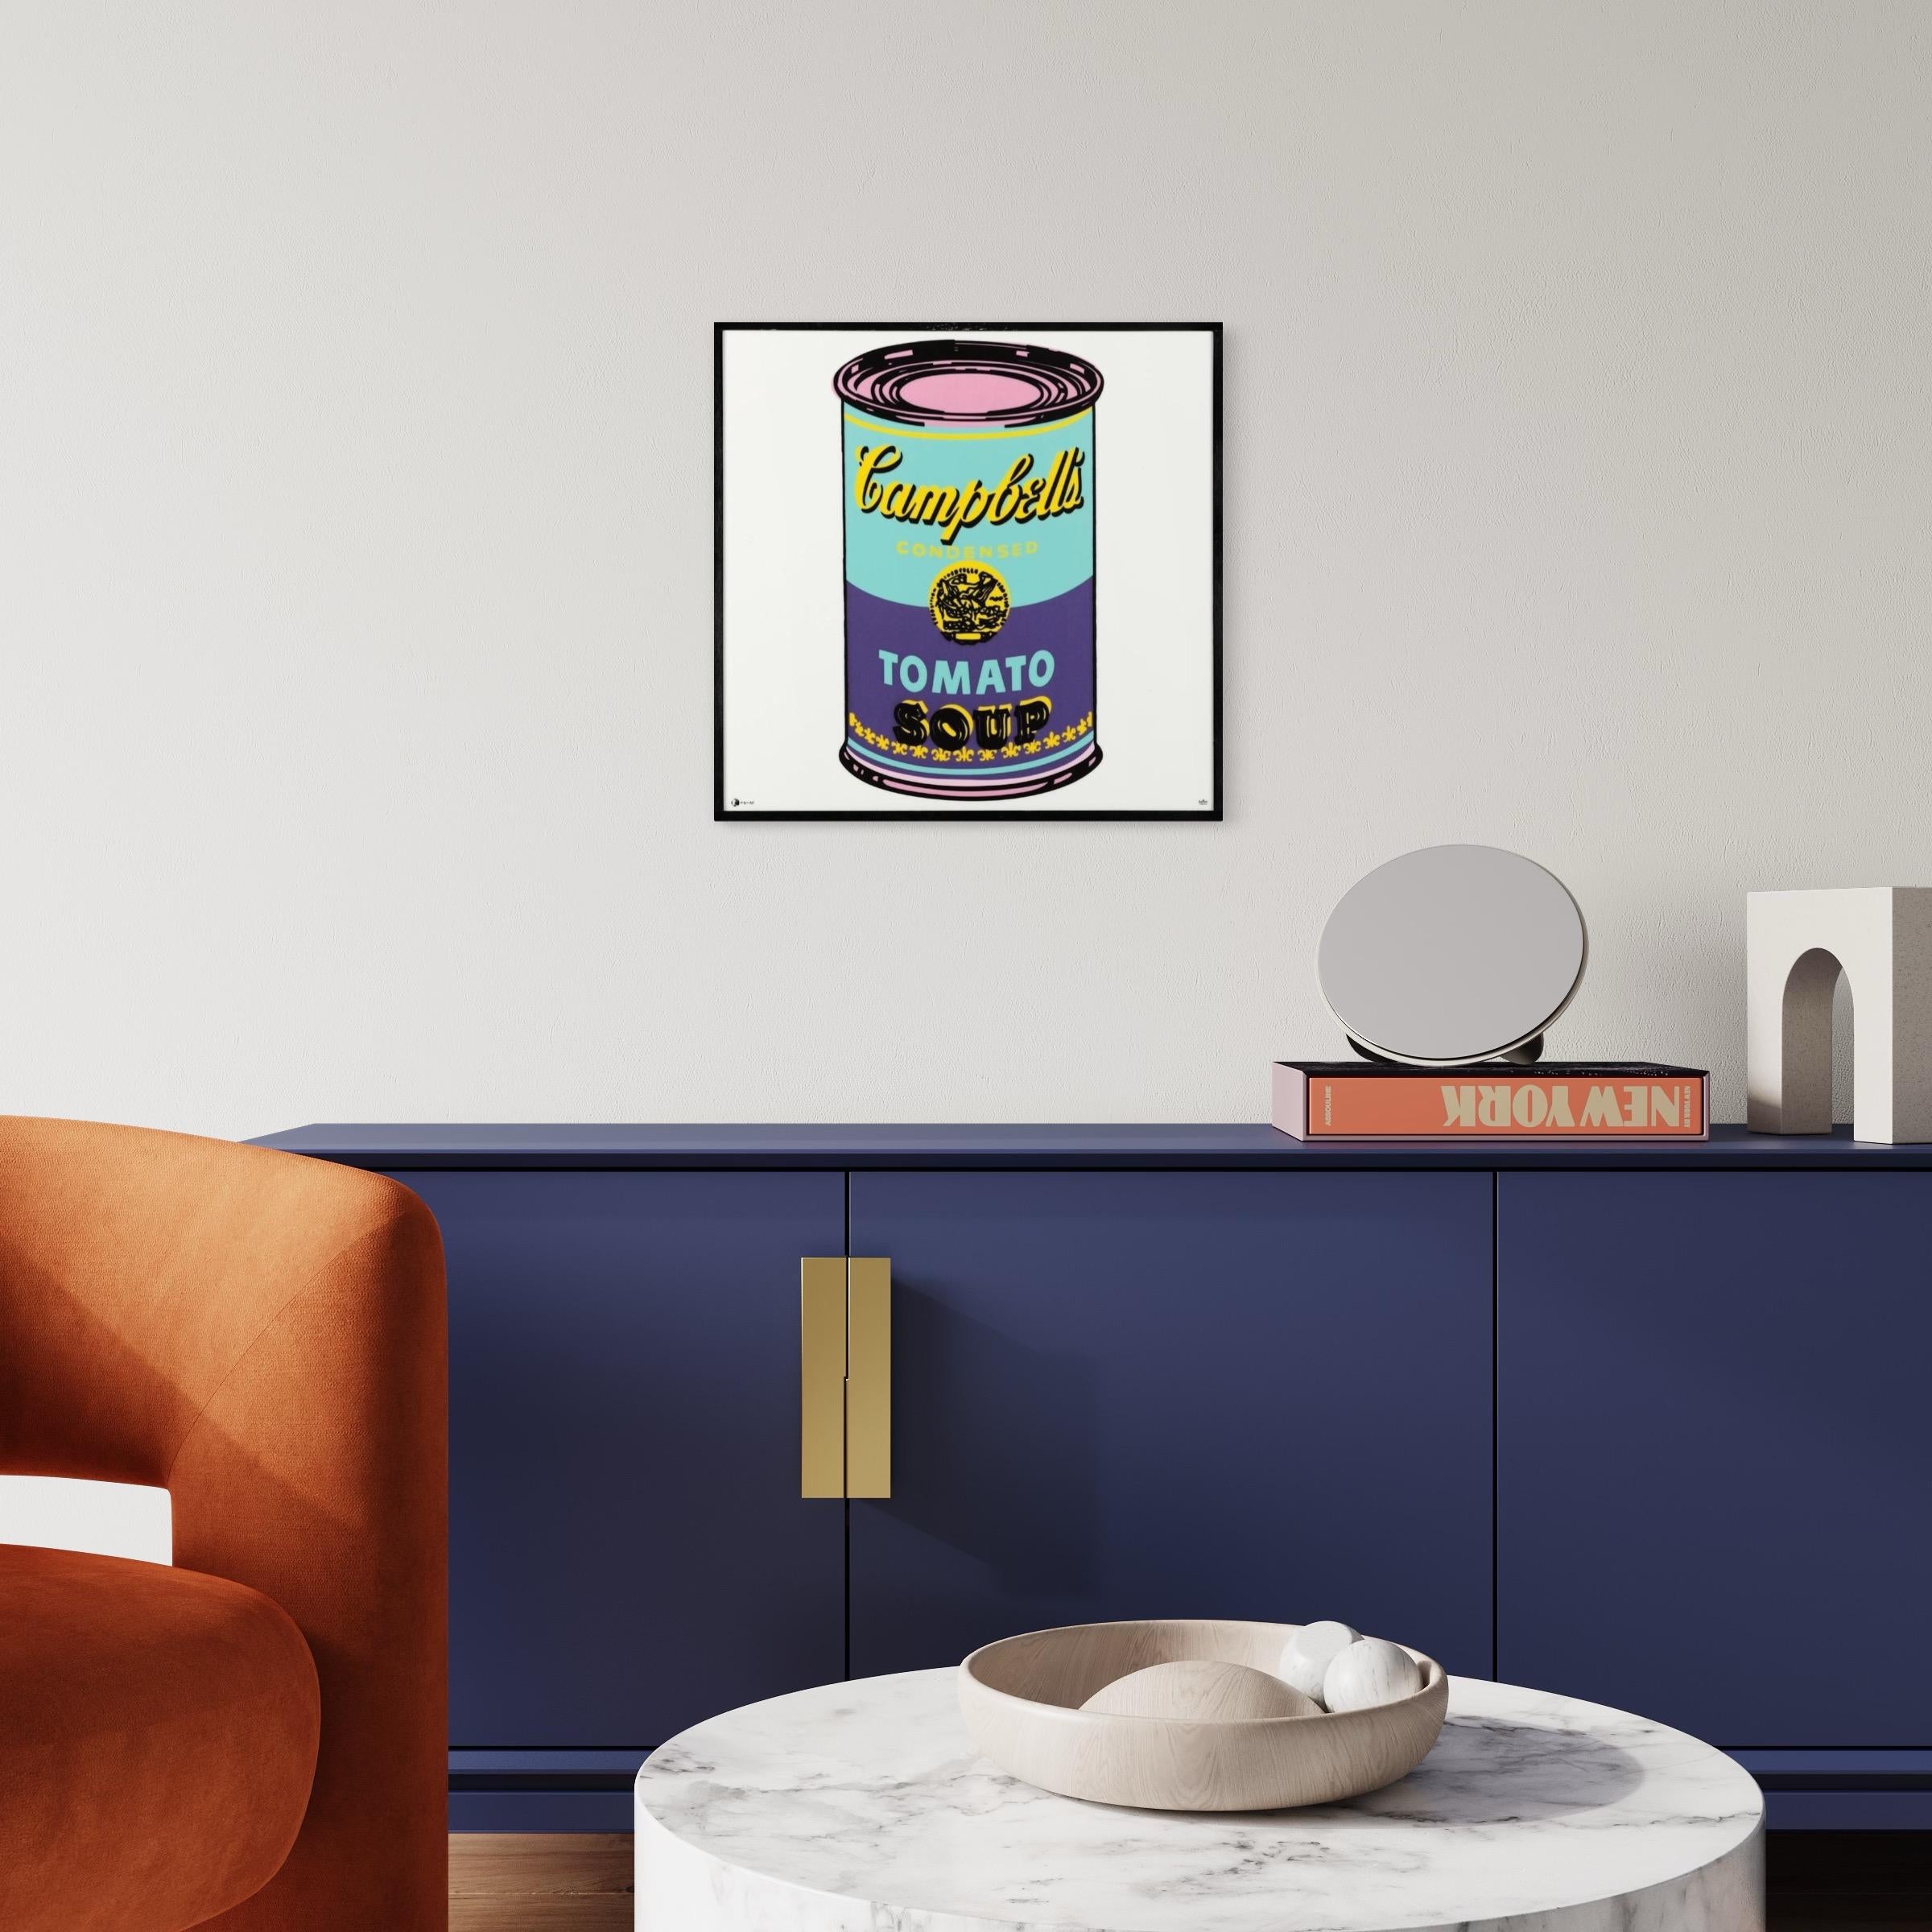 ANDY WARHOL
Campbell Soup
2012
Enamel on porcelain
51 × 51 × 2 cm
(20.1 × 20.1 × 0.8 in)
Edition of 49
In mint condition
Signed in glaze (fac-simile signature), numbered on the reverse on label In wooden box, accompanied by Certificate of